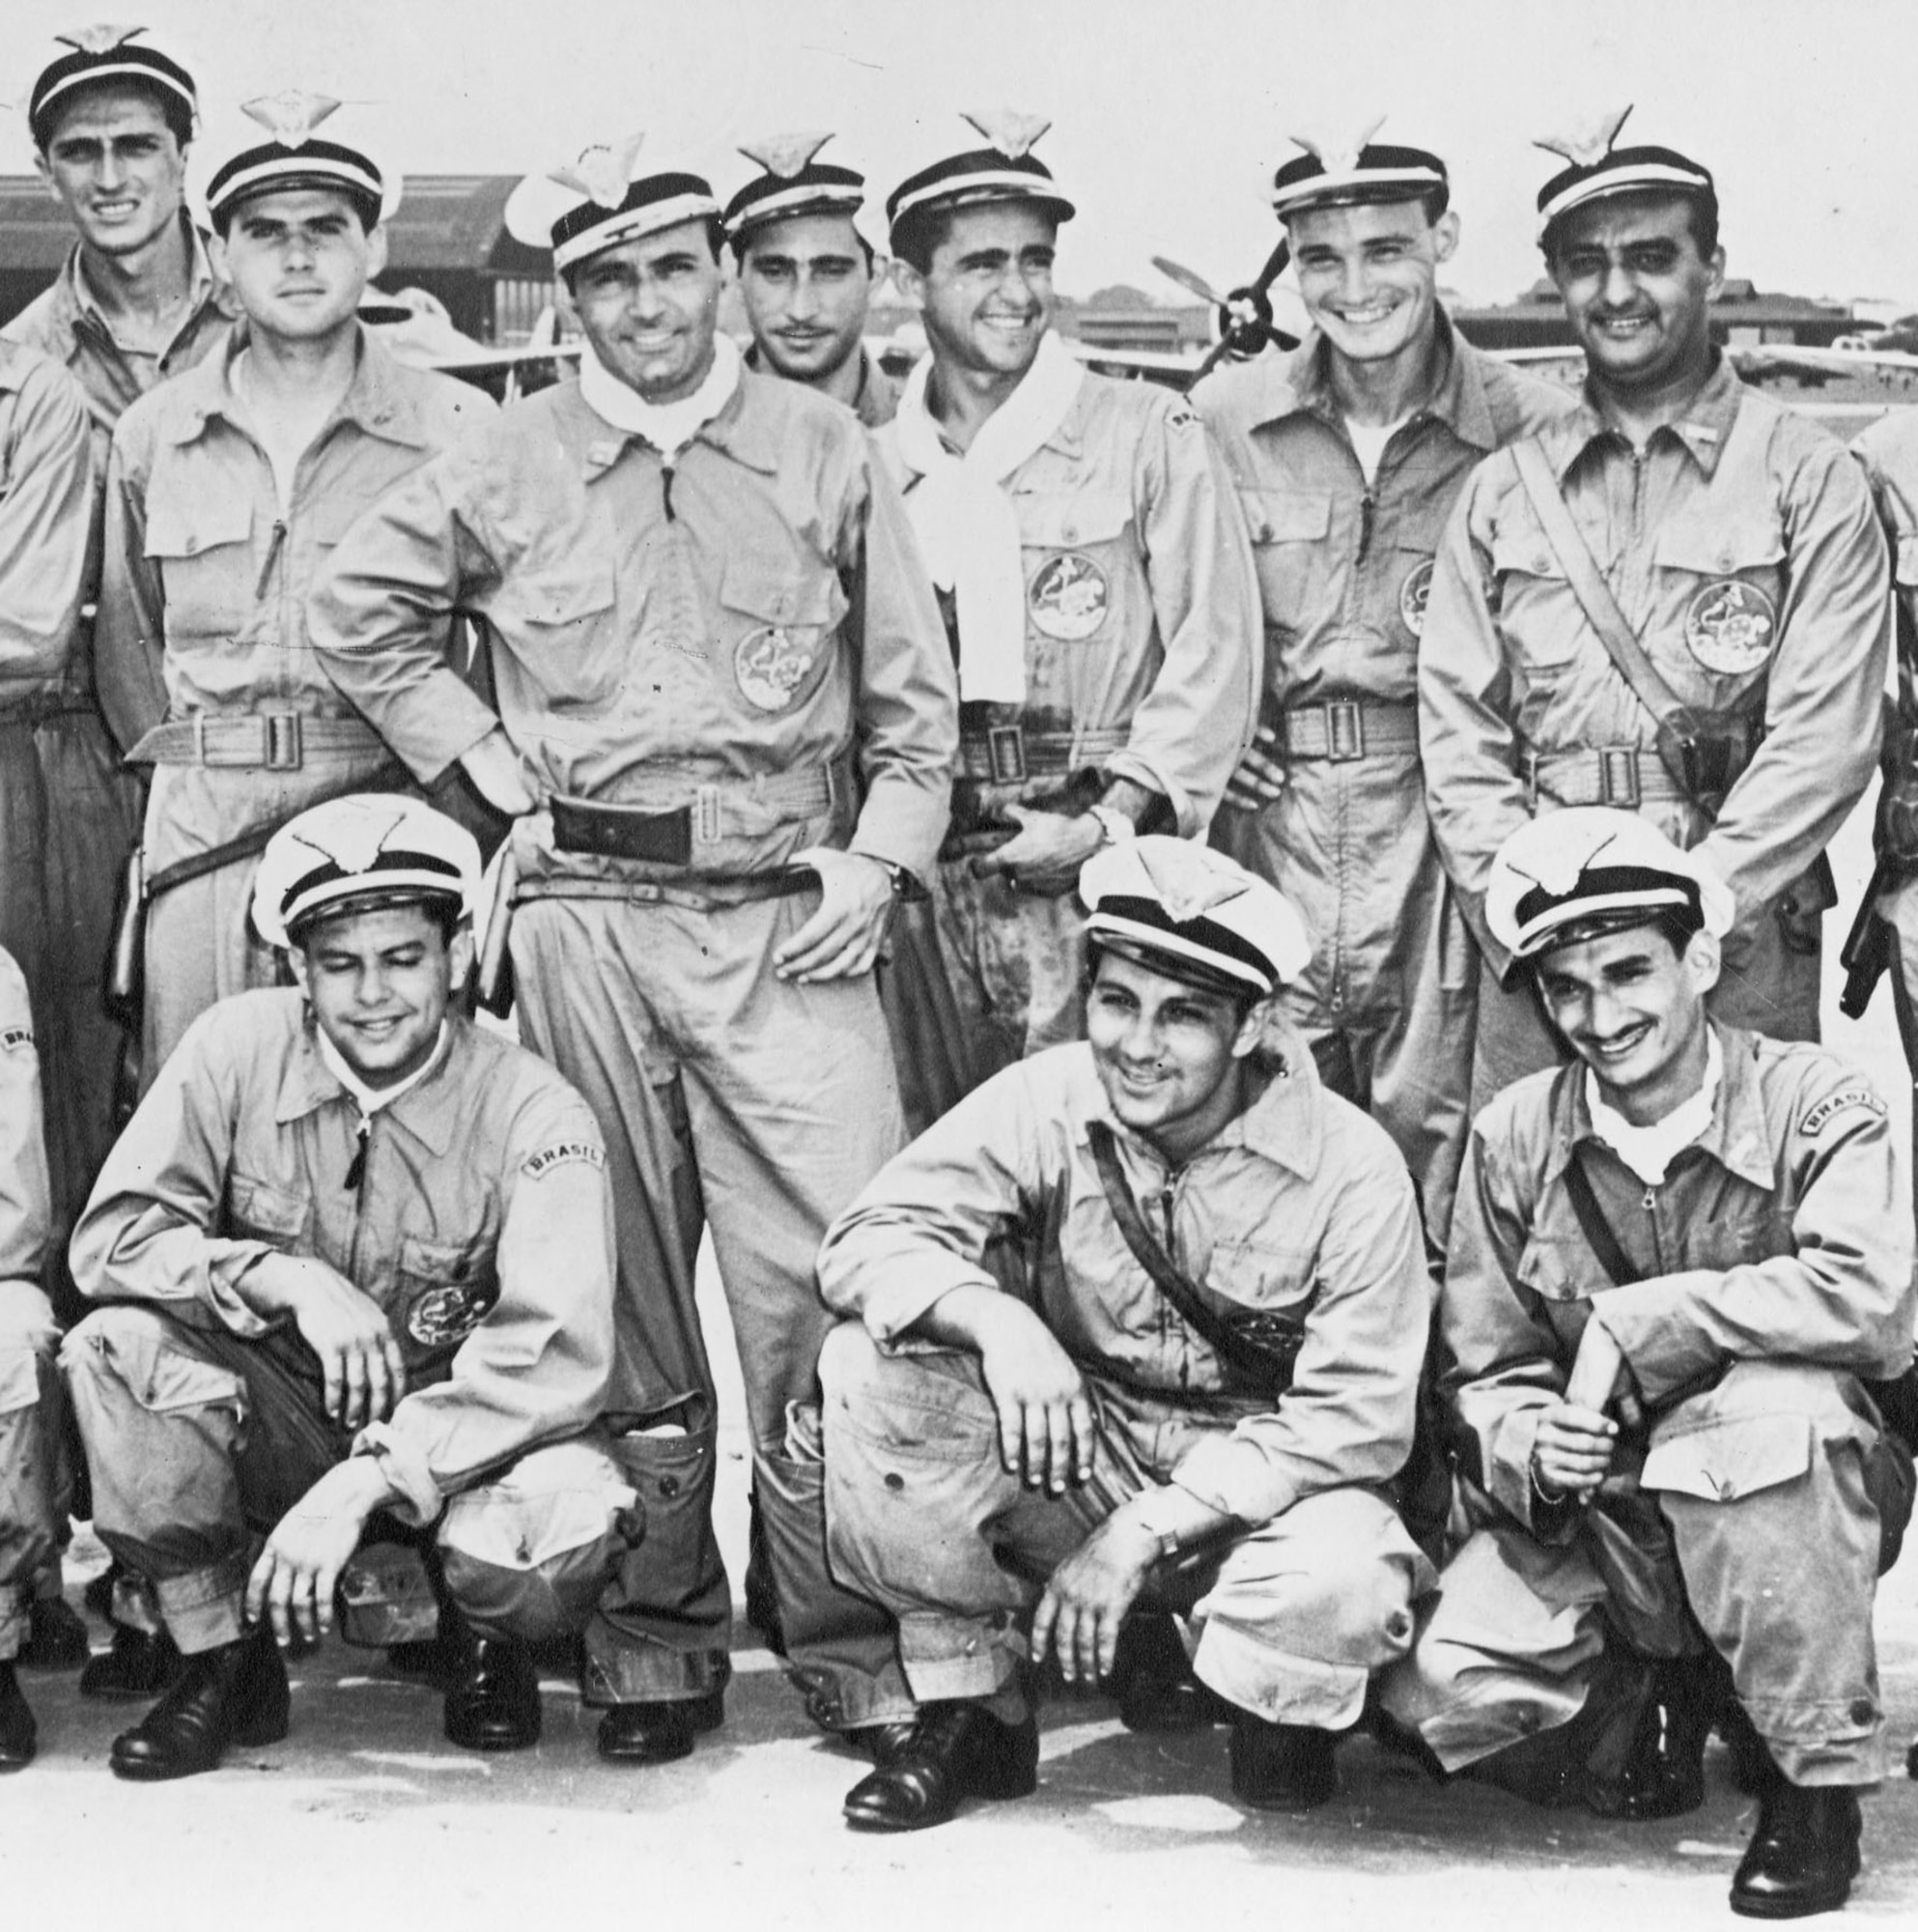 1º GAC pilots wore their distinctive white caps when they were not flying. (U.S. Air Force photo)